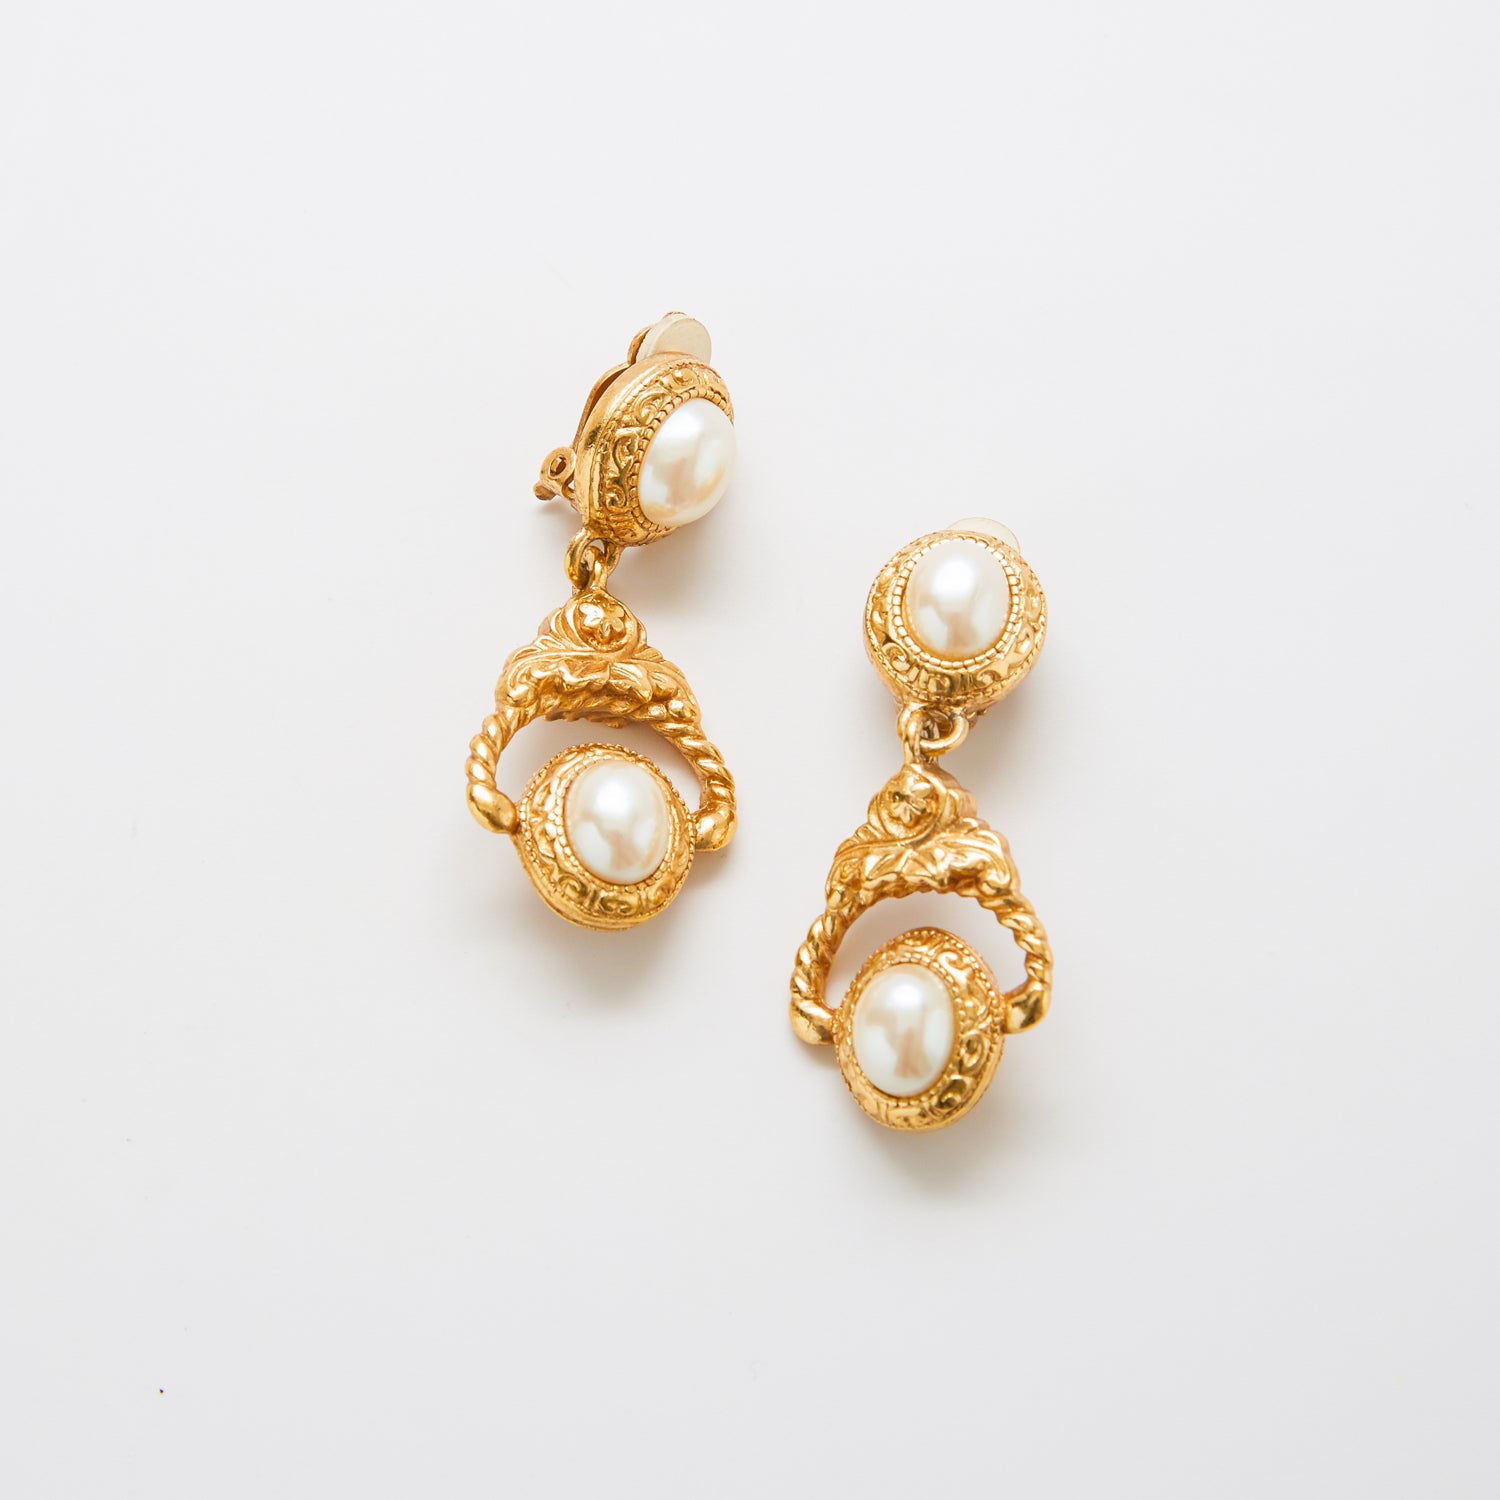 Vintage Givenchy Pearl And Floral Earrings